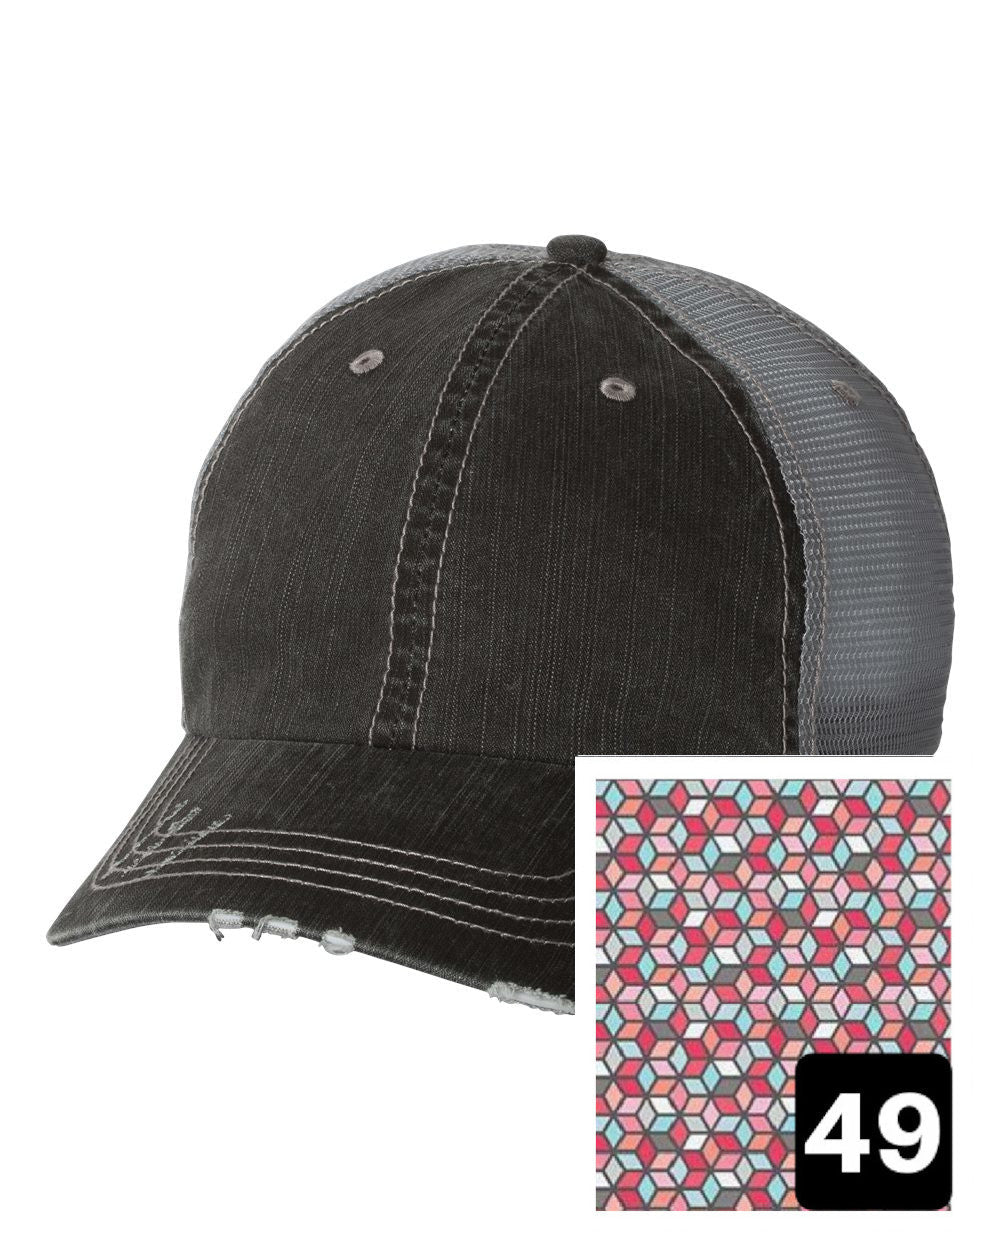 gray distressed trucker hat with pink trellis fabric state of Maine